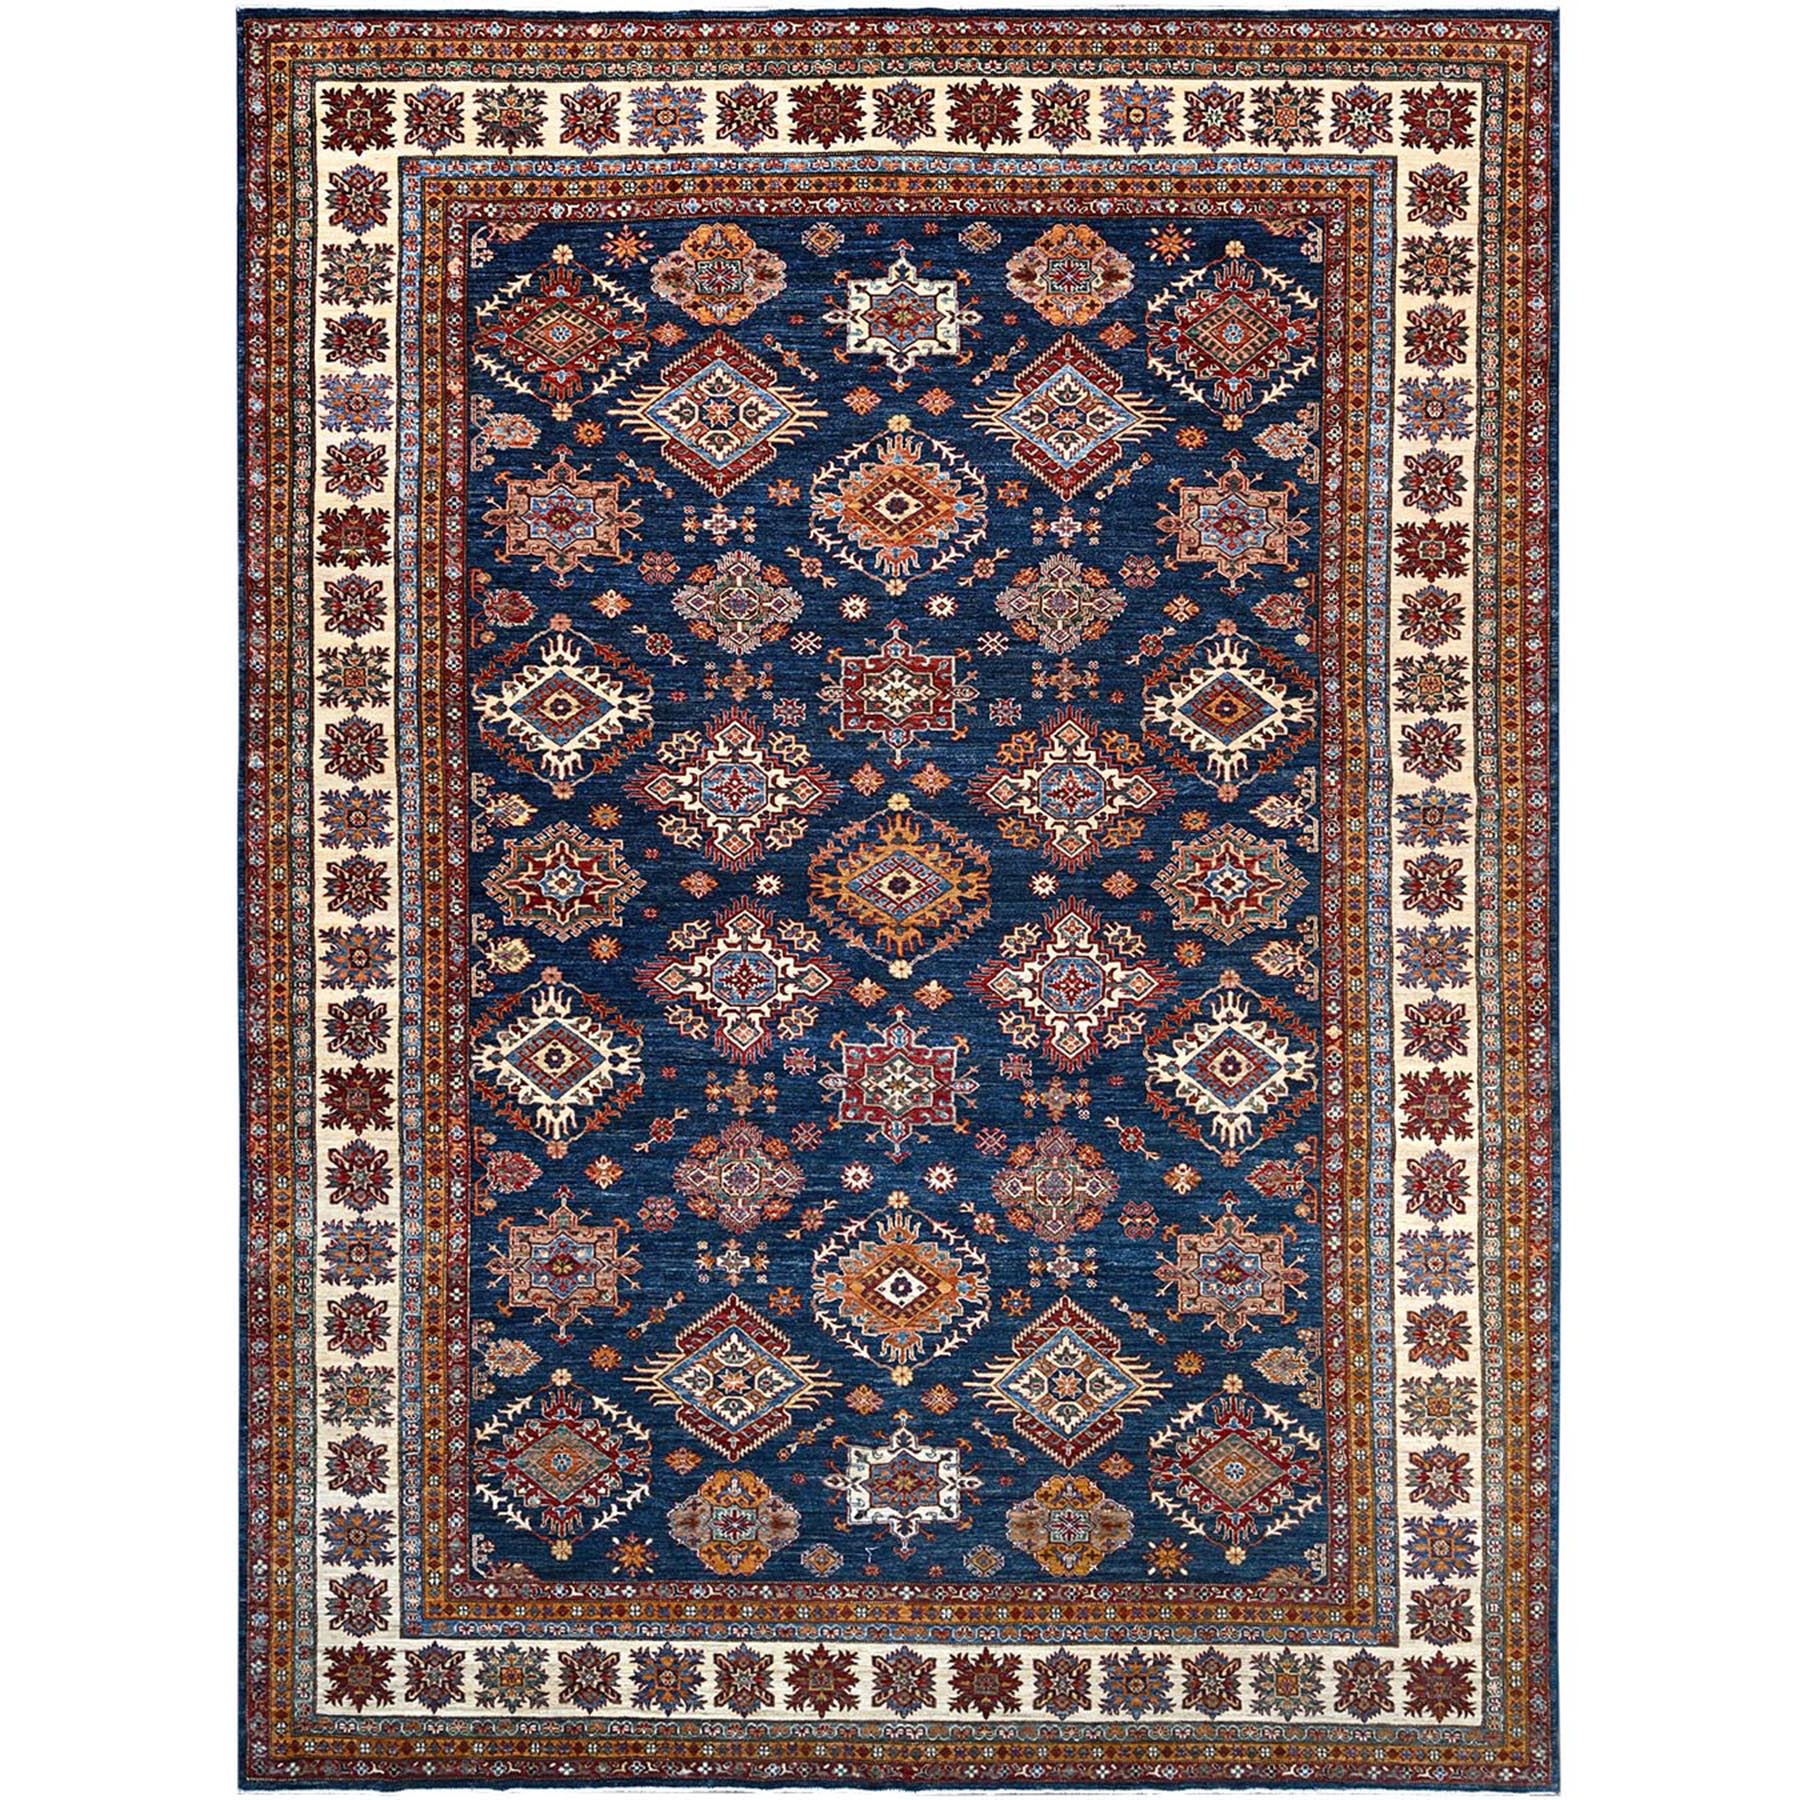 Pantone Blue, Shiny Wool Hand Knotted Afghan Super Kazak with Tribal Medallions Design, Vegetable Dyes, Densely Woven Oriental Rug